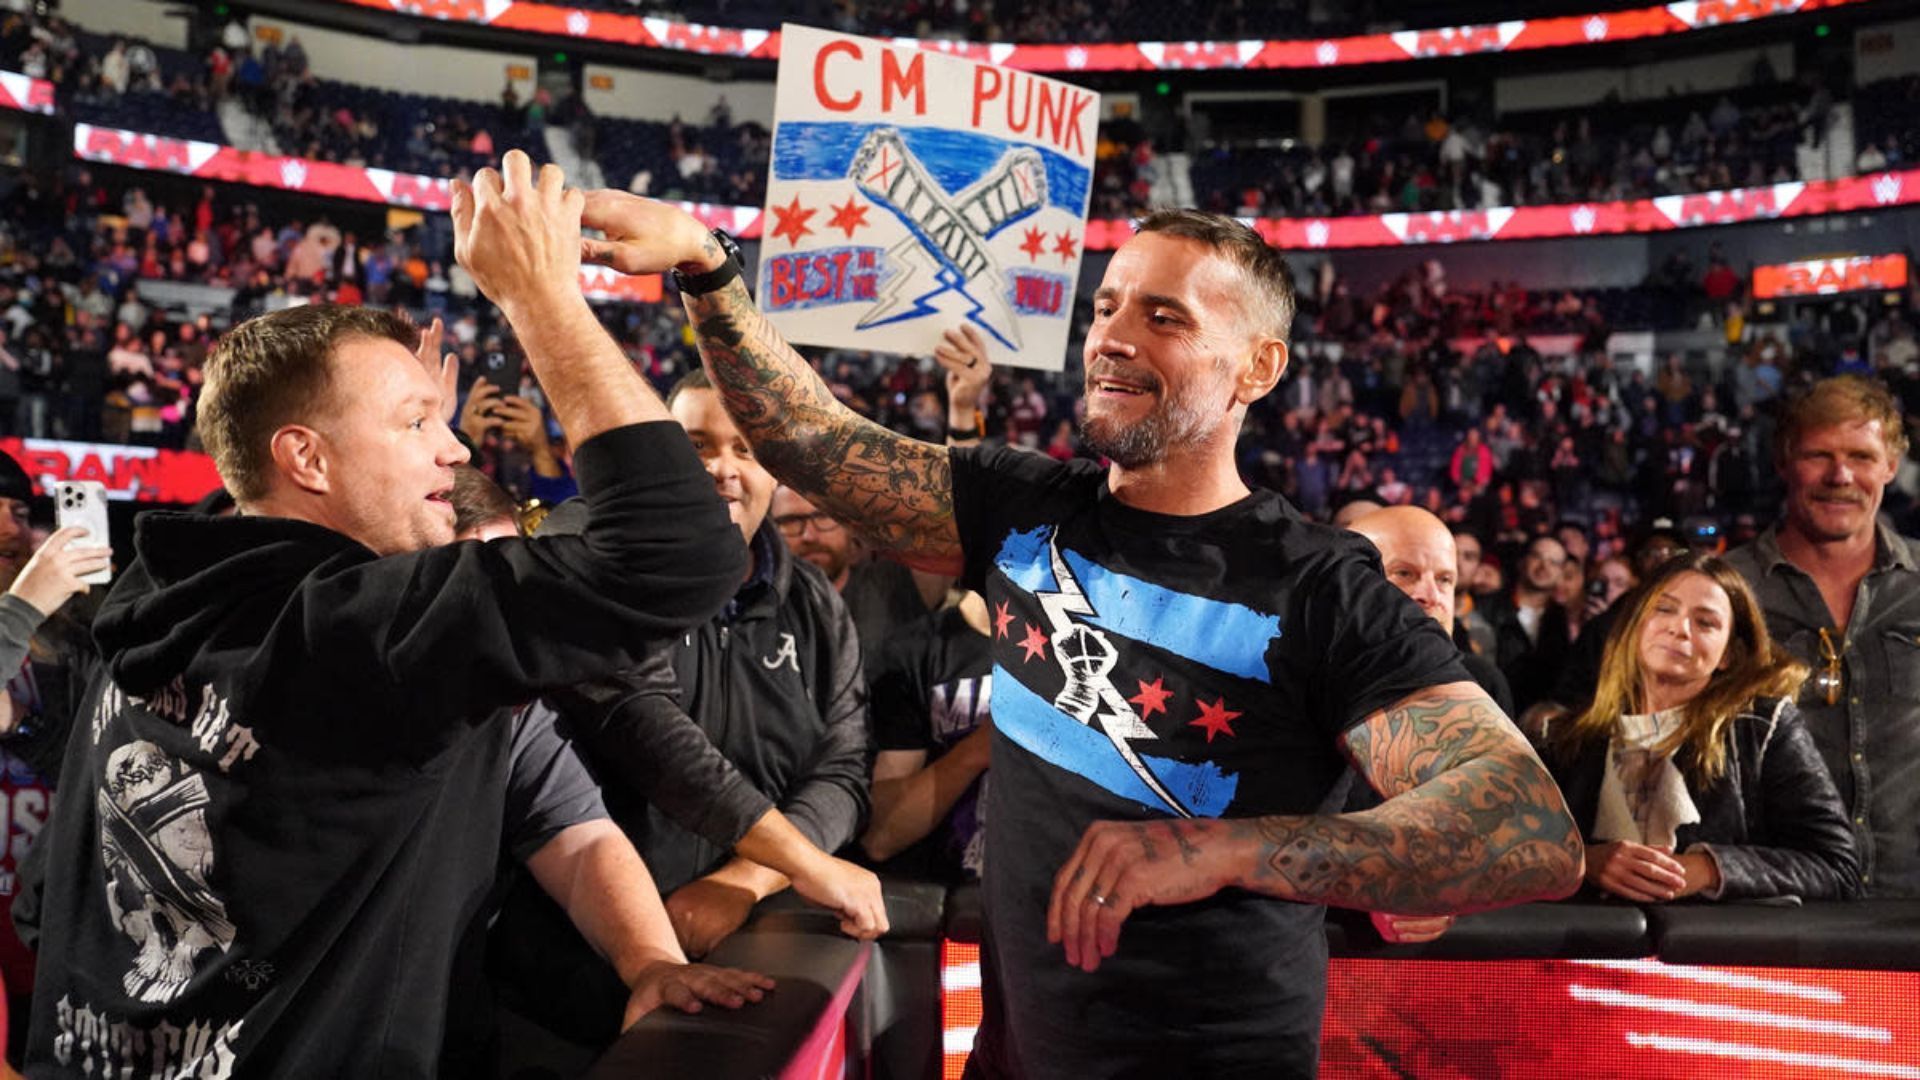 CM Punk during his entrance. Image Credits: X